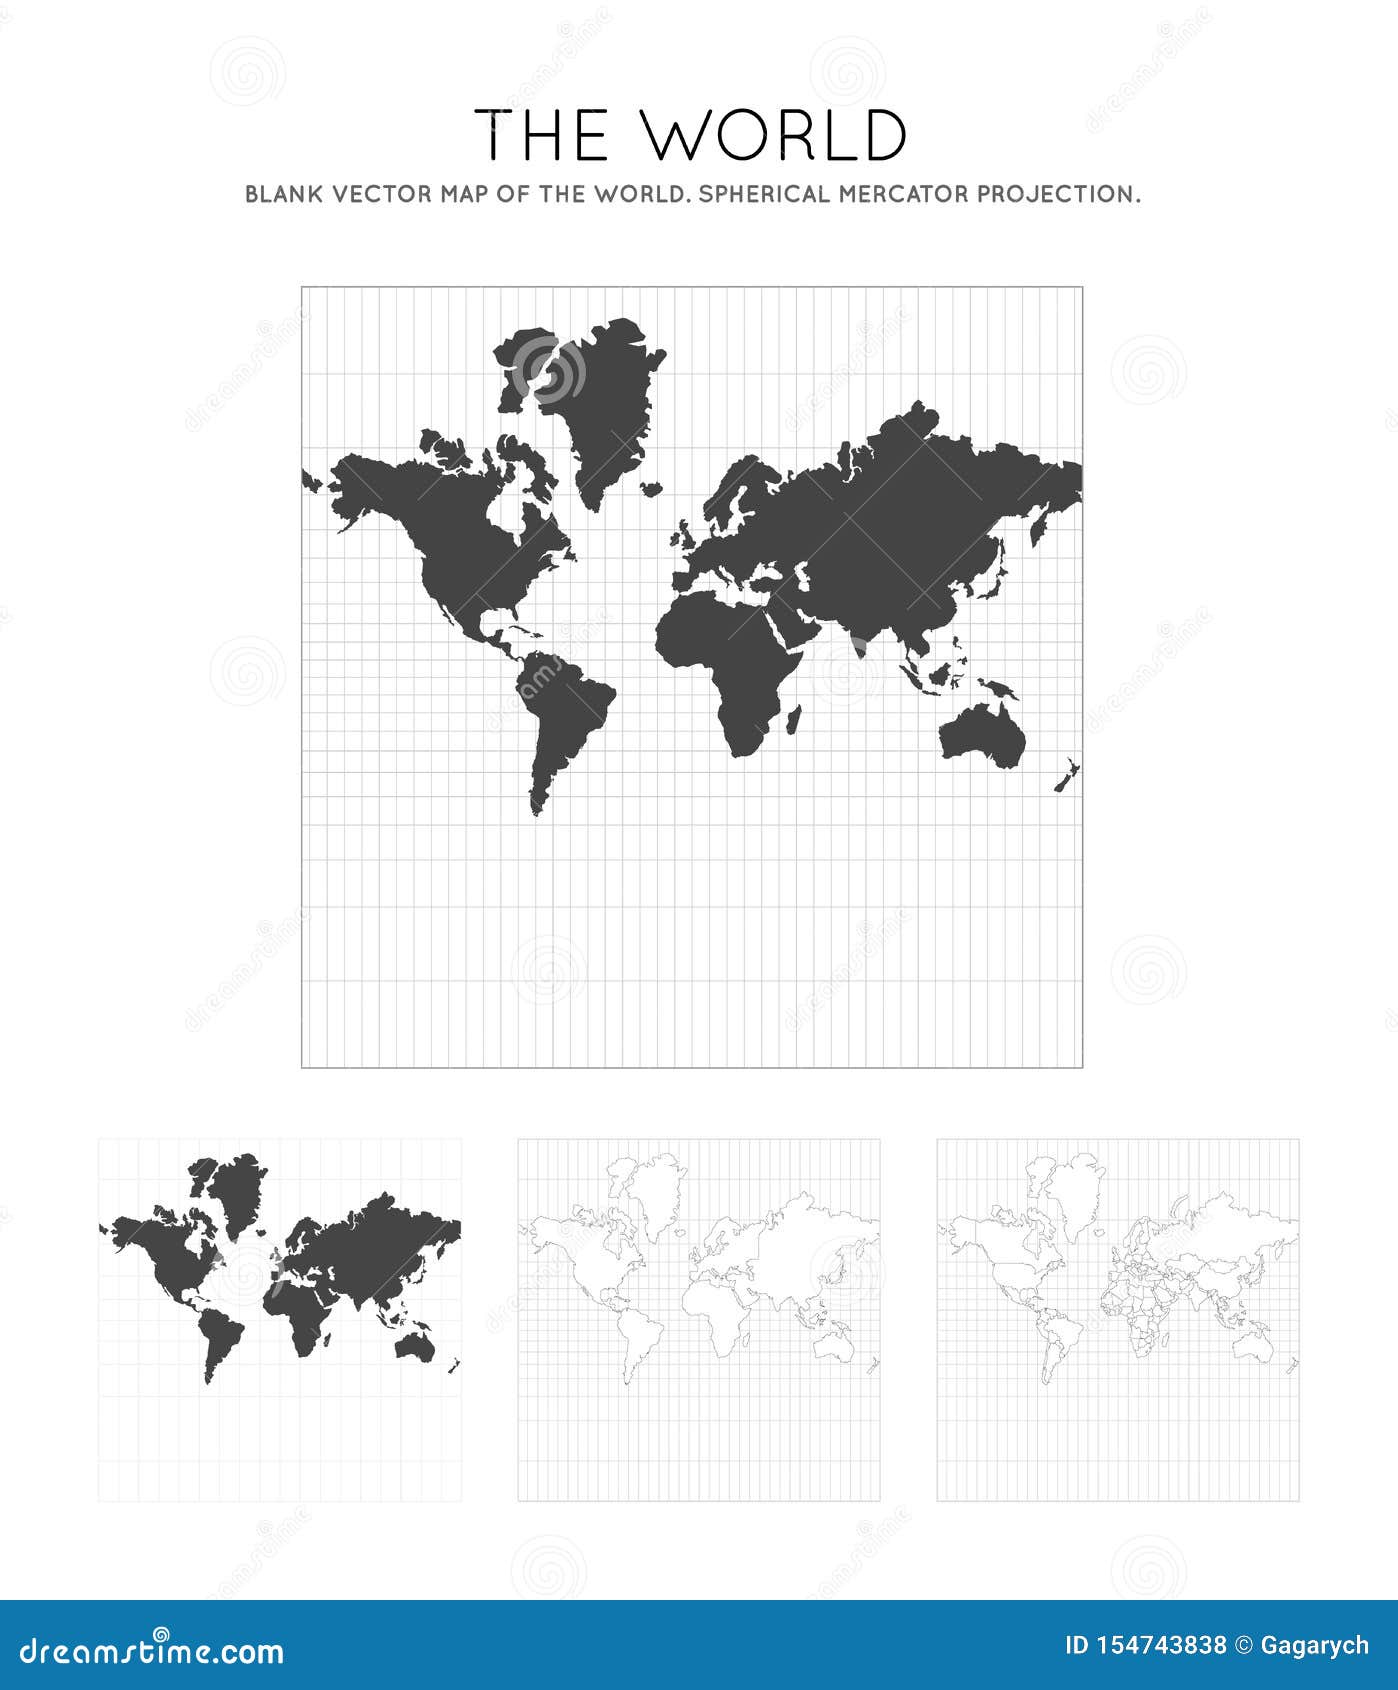 map of the world. spherical mercator projection.